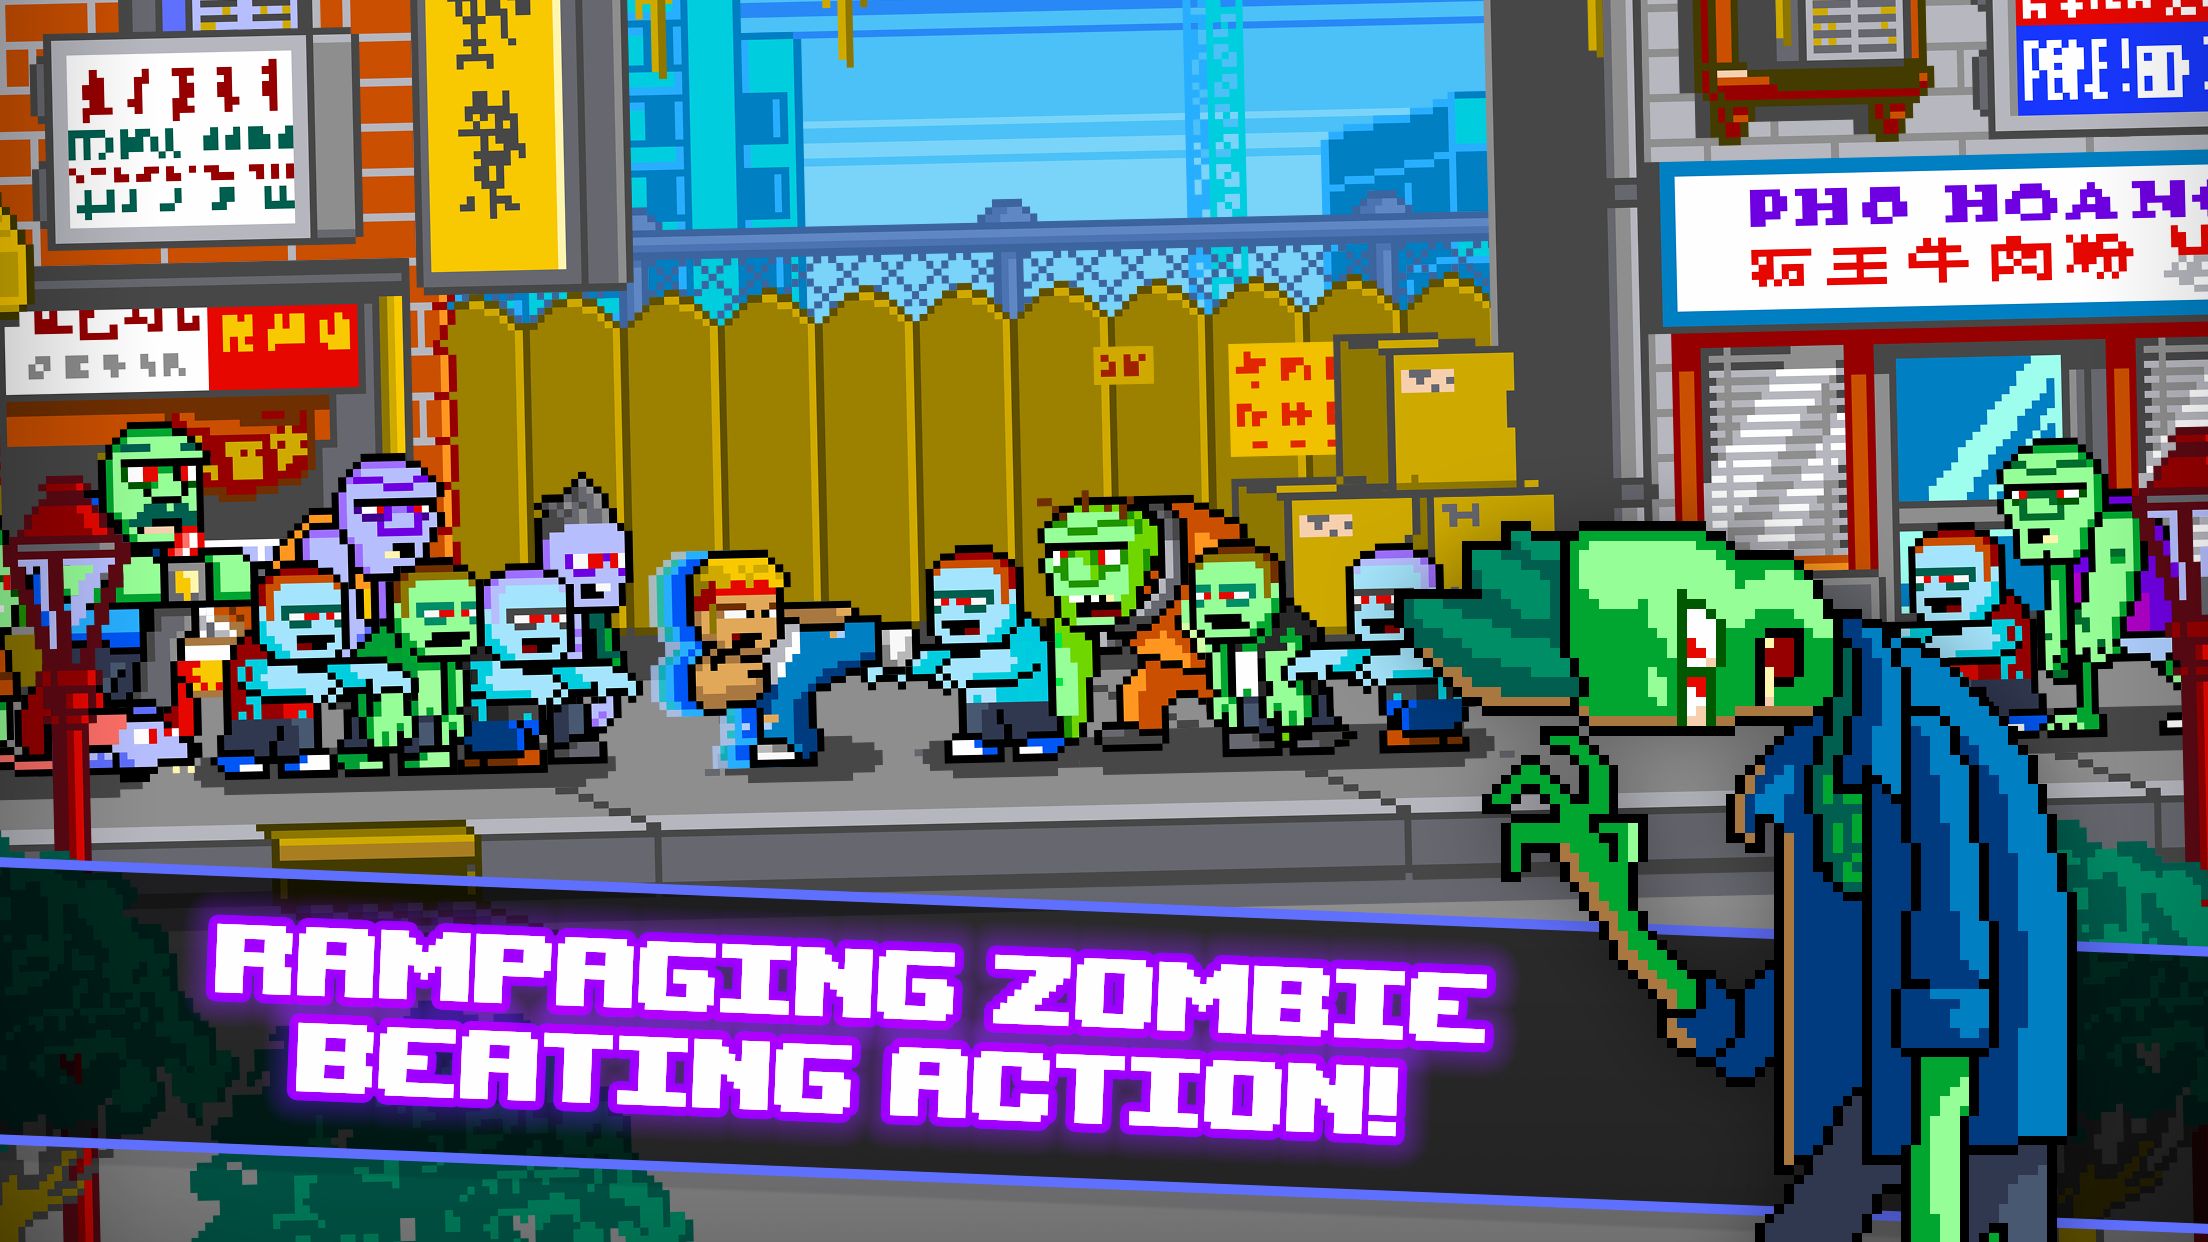 best-beat-em-up-games-kung-fu-zombies-rampaging-zombie-beating-action